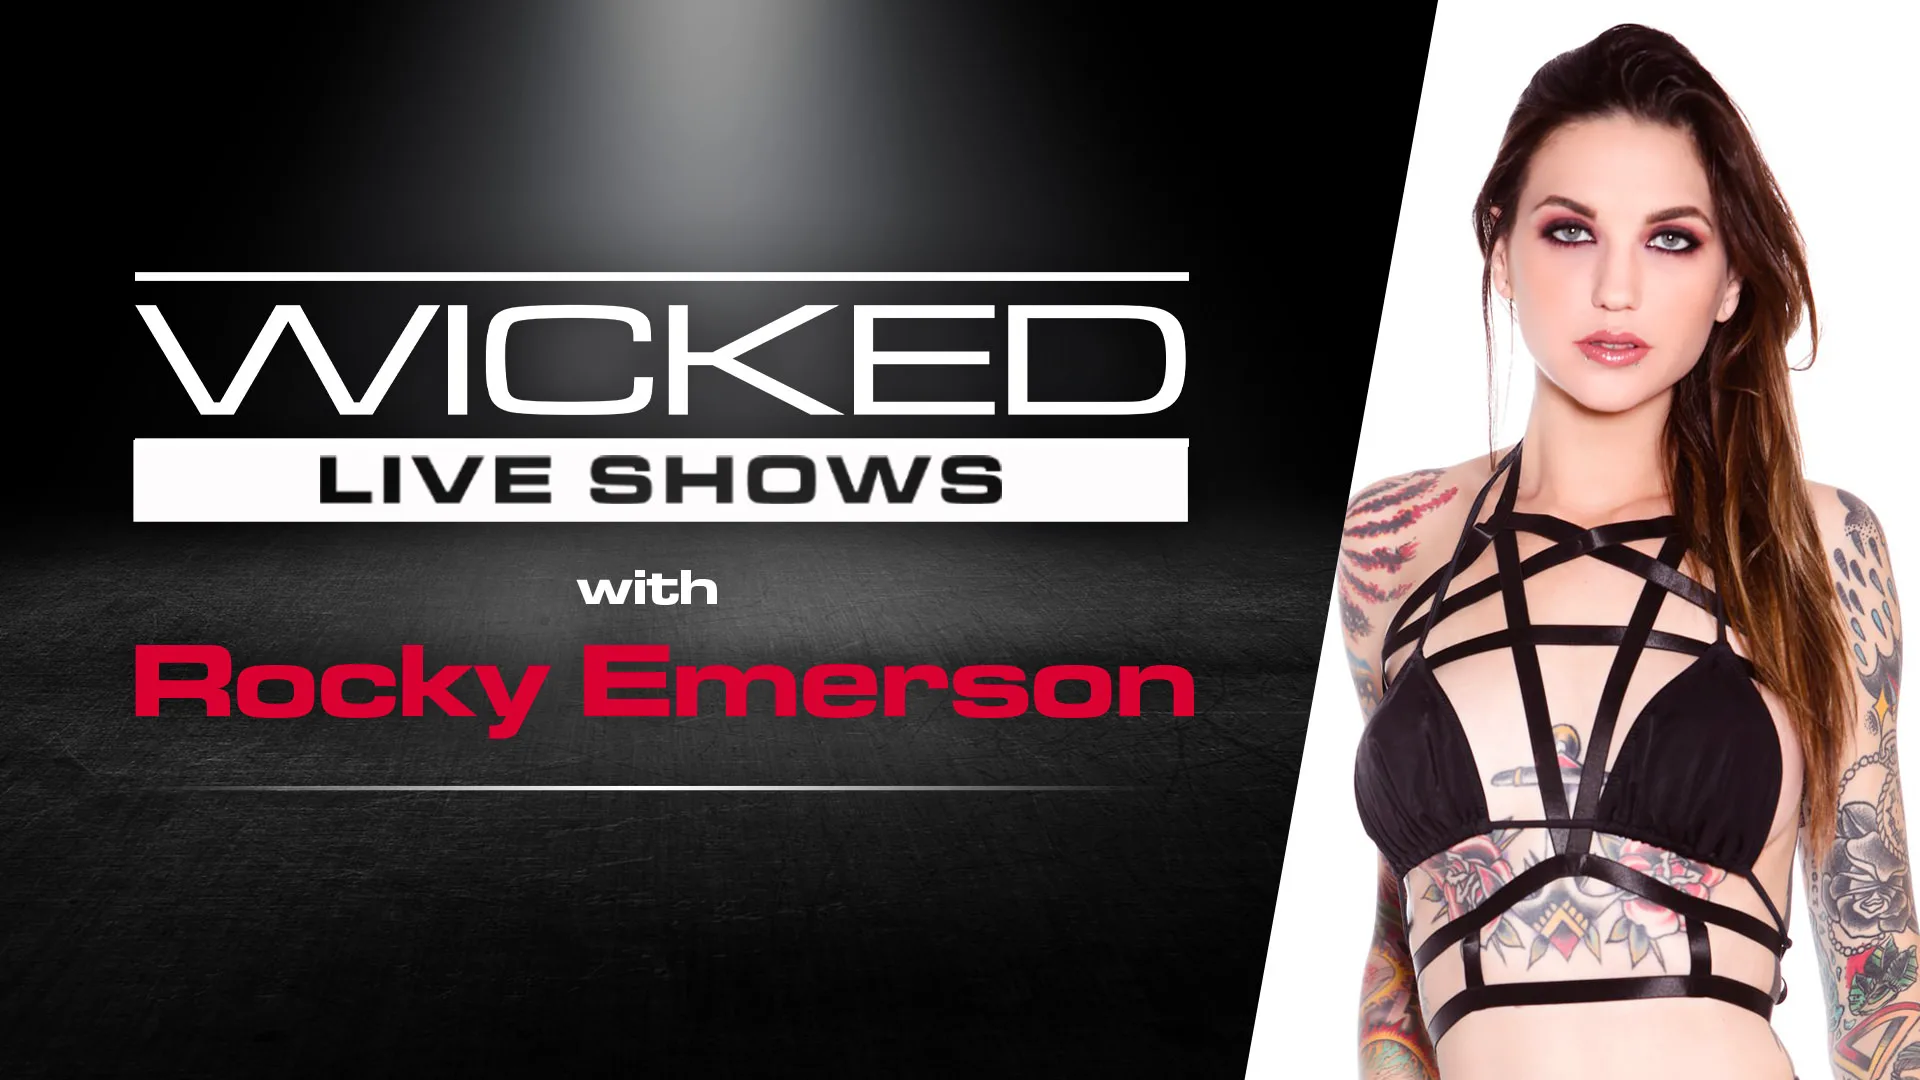 Wicked Live - Rocky Emerson - WICKED